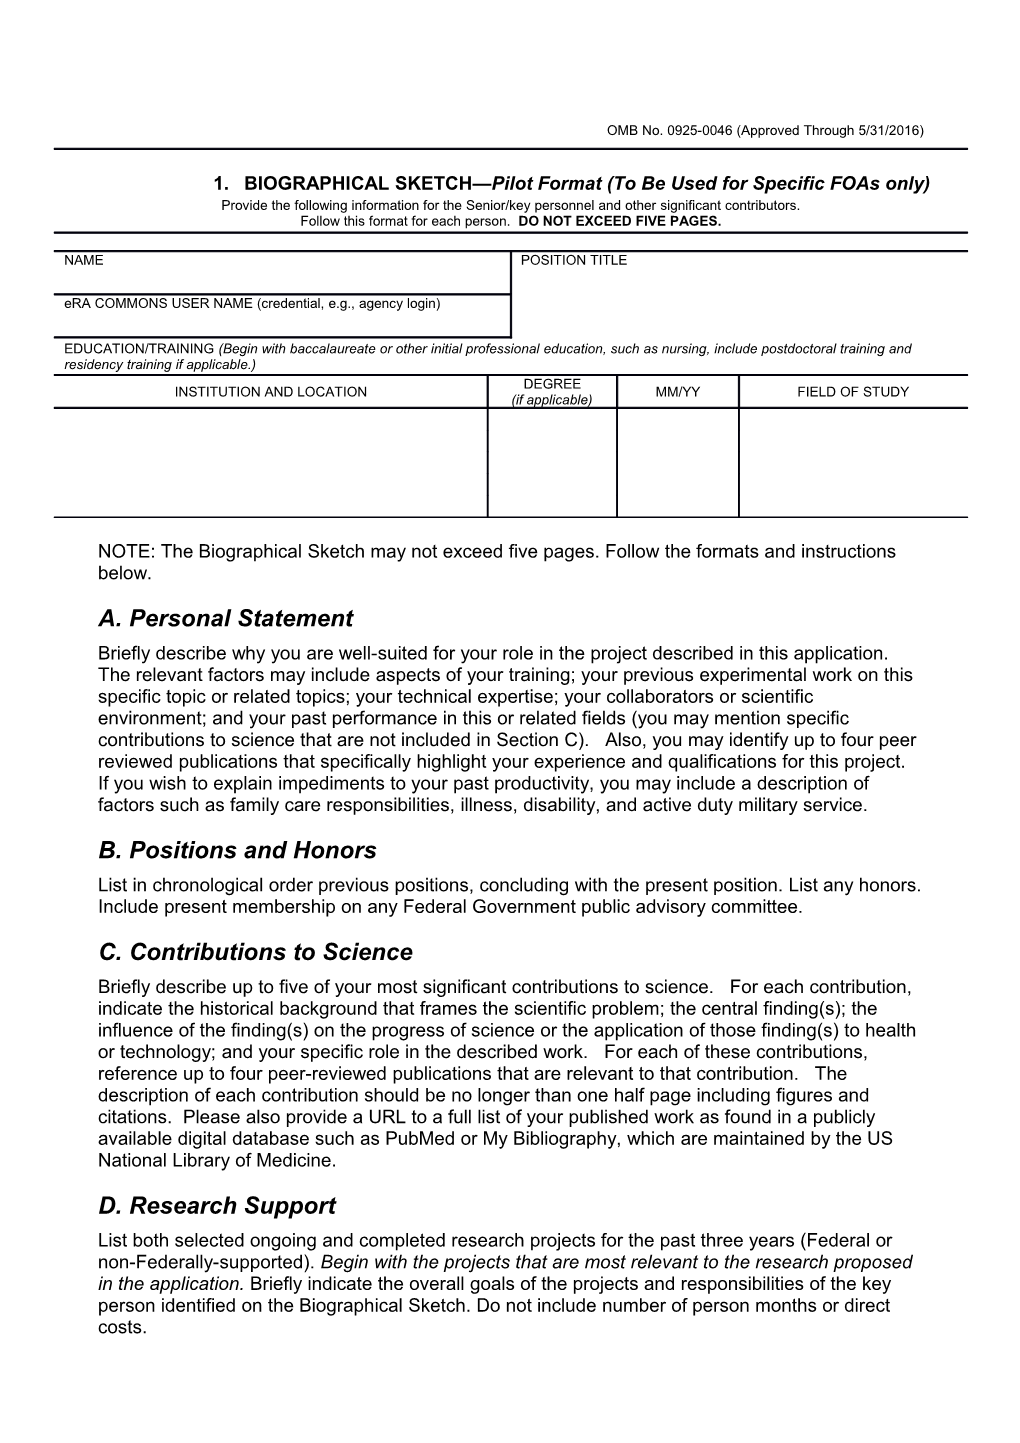 OMB No. 0925-0046, Biographical Sketch - Pilot Format Page - Sample